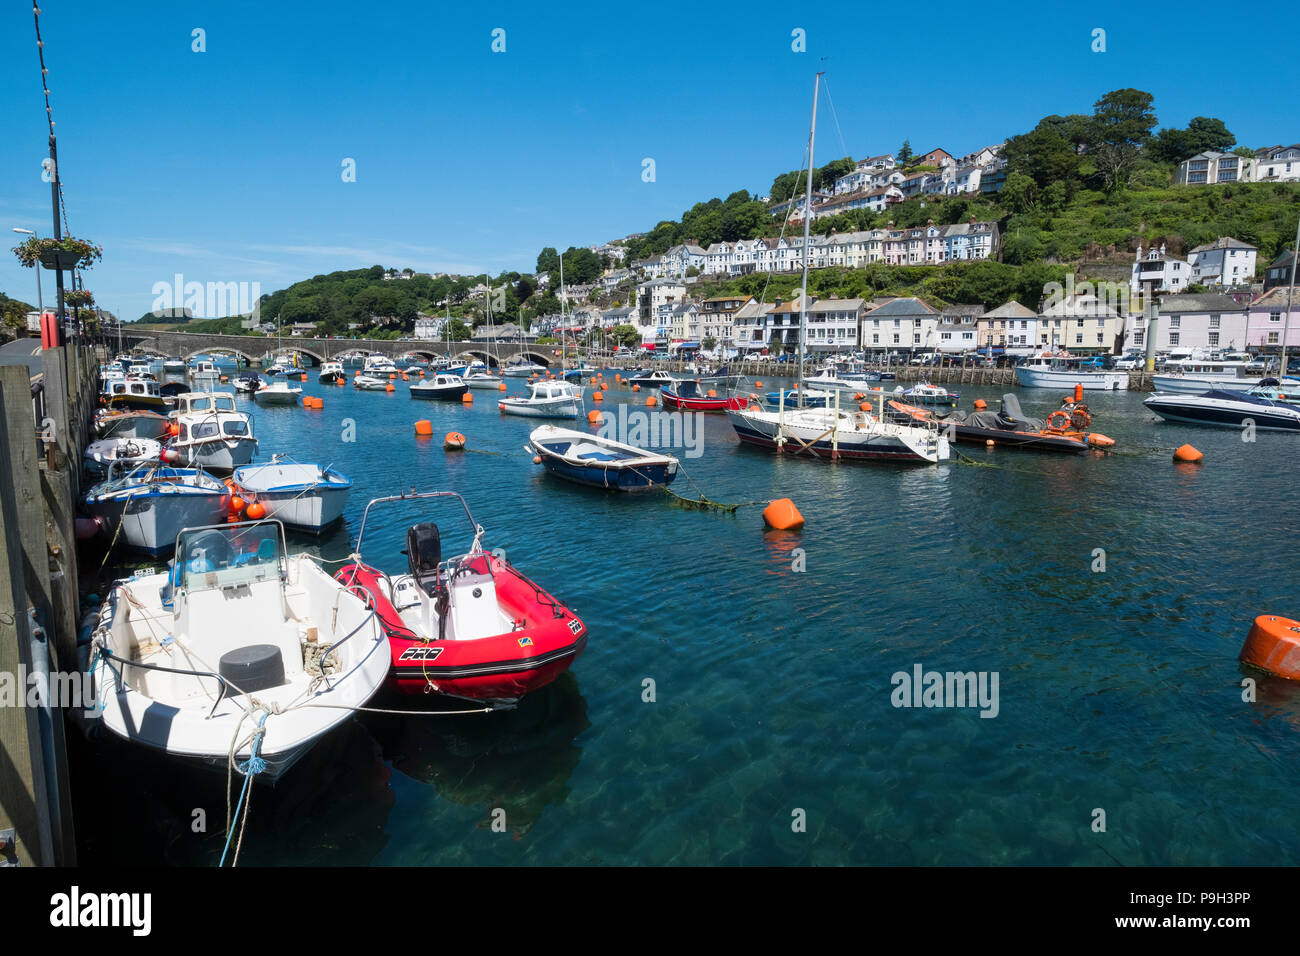 Boats moored in the harbour at the fishing port of Looe, Cornwall, England, UK. Stock Photo